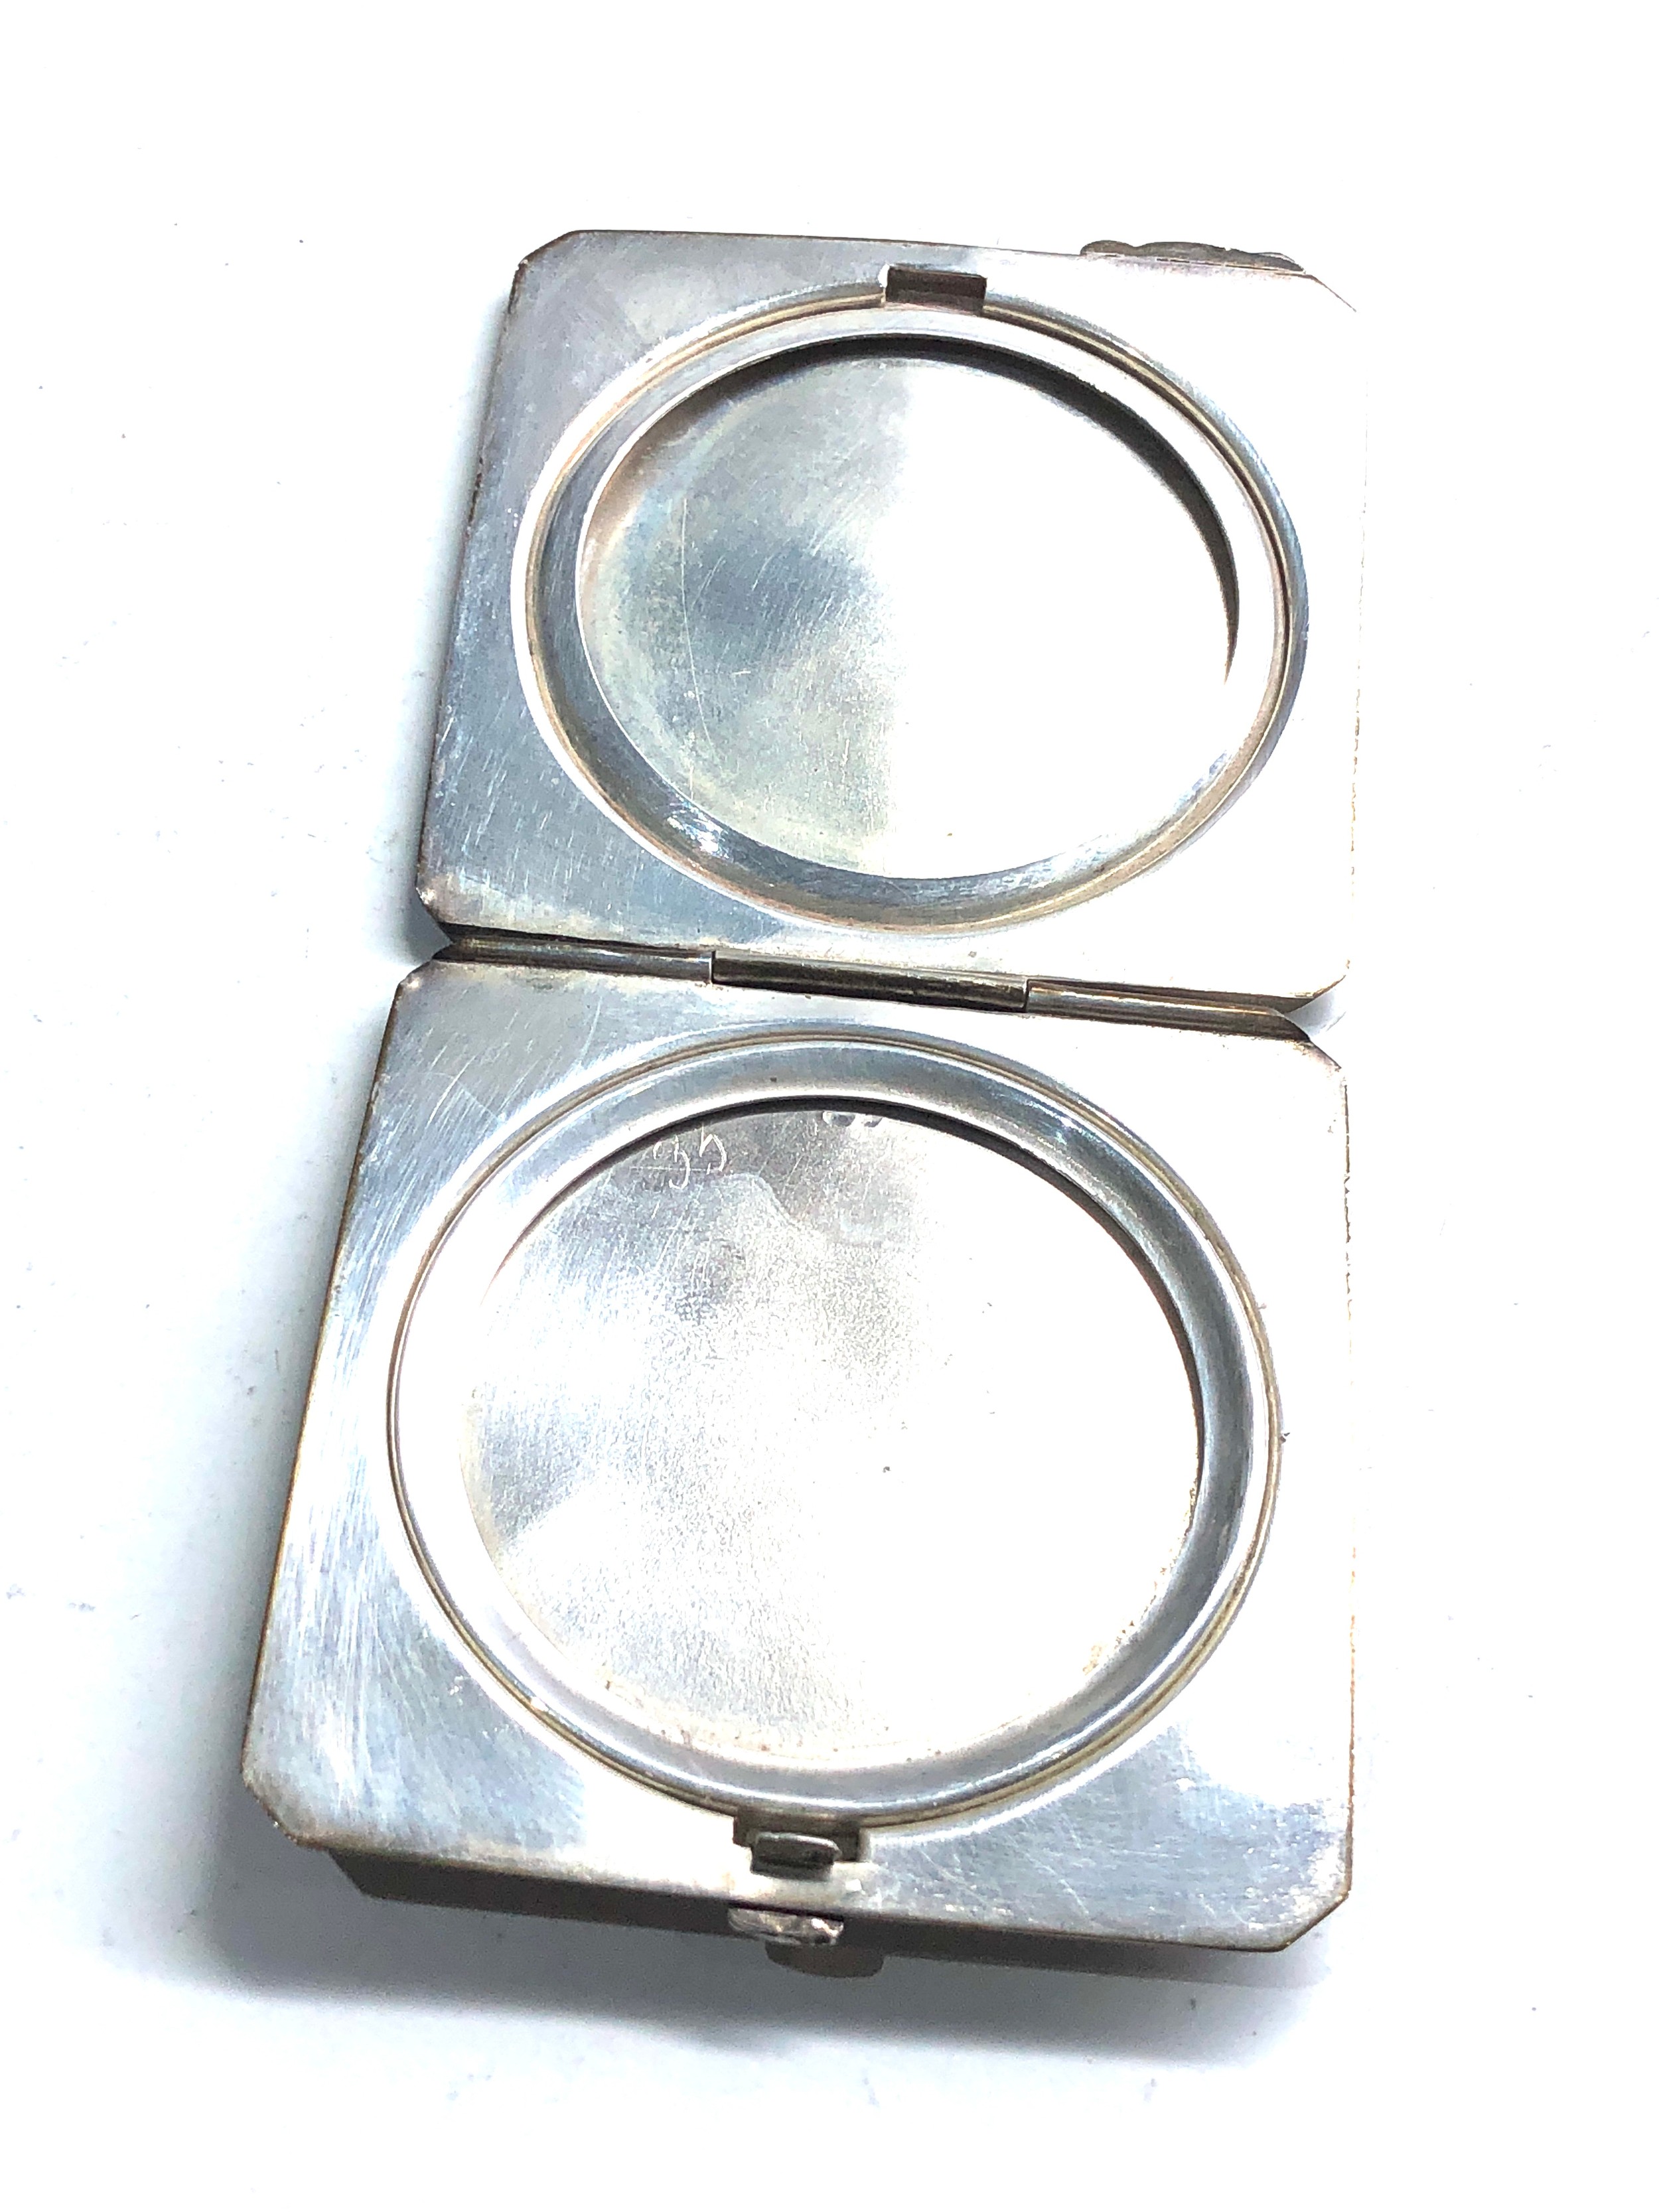 Silver compact measures approx 6.5 cm dia weight 70g no mirror etc - Image 3 of 4